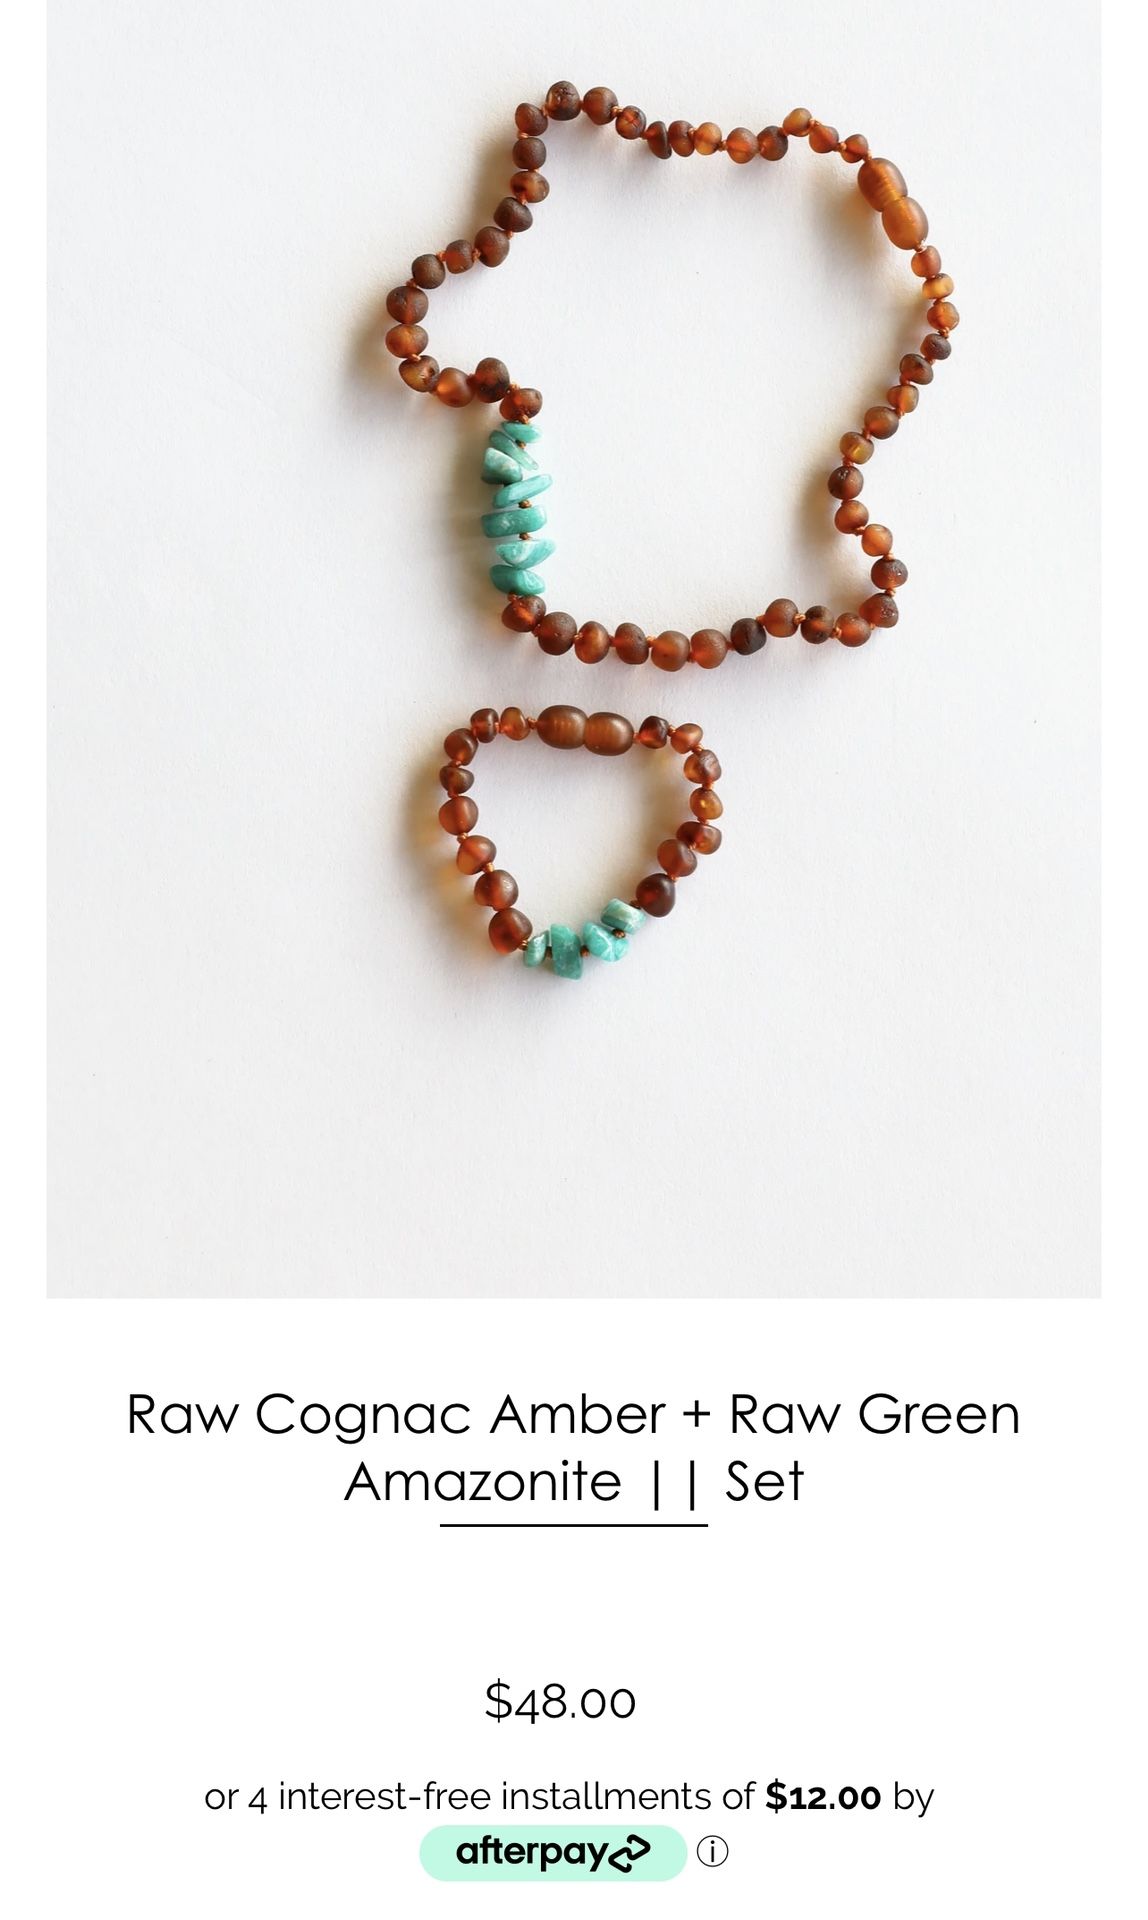 Amber Teething Necklace (Brand New) 